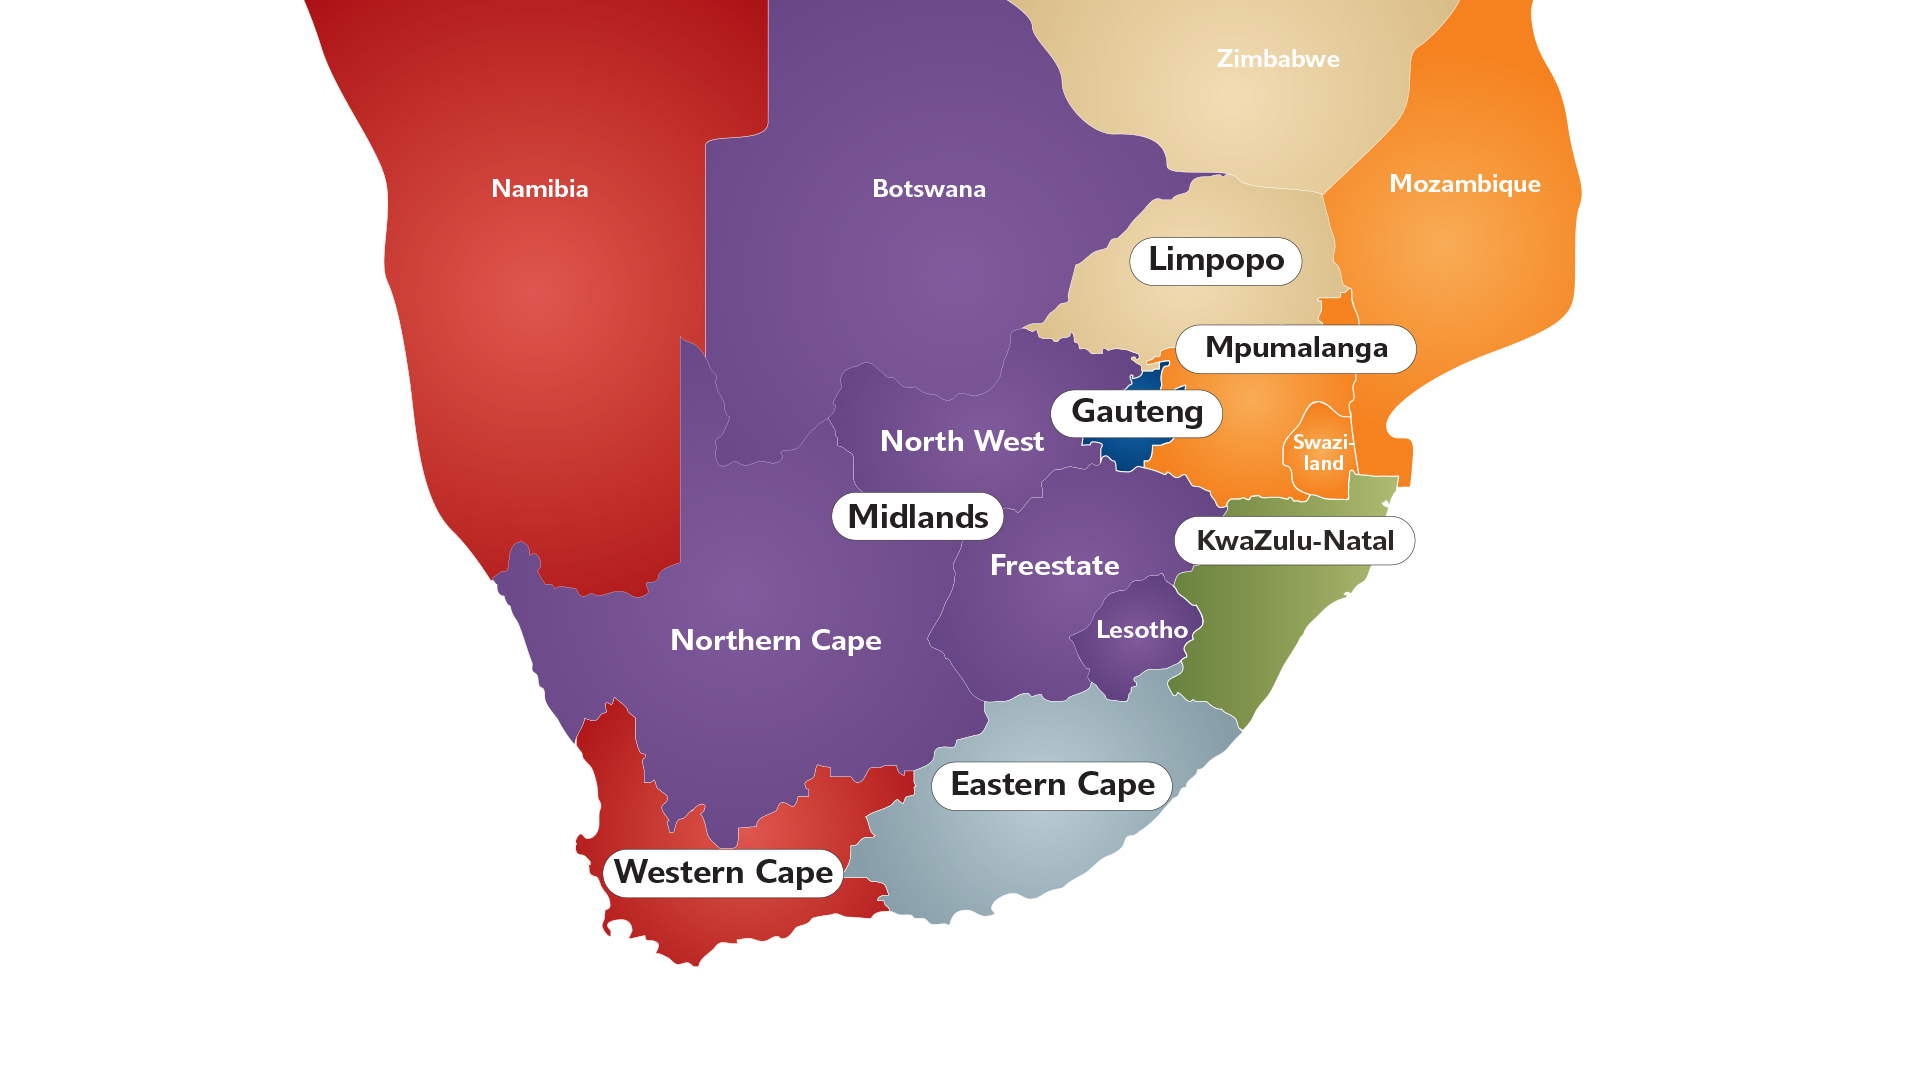 <p>In 2017 there were seven Unisa regional centres or 'hubs' in full operation.  Eastern and Western Cape, Gauteng, KZN, Midlands, Limpopo and Mpumalanga, with regional head offices in East London, Cape Town, Sunnyside (Pretoria), Durban, Rustenburg, Polokwane and Nelspruit respectively The hubs, in turn, were responsible for the operations of smaller service centres or agencies.  The regional hubs and service centres offered administrative and student (academic) support and advice, library services and career counselling.<br /><br />The Unisa regional model represents a remarkable venture to bring university education to students across the country, especially those in more remote and rural districts.</p>